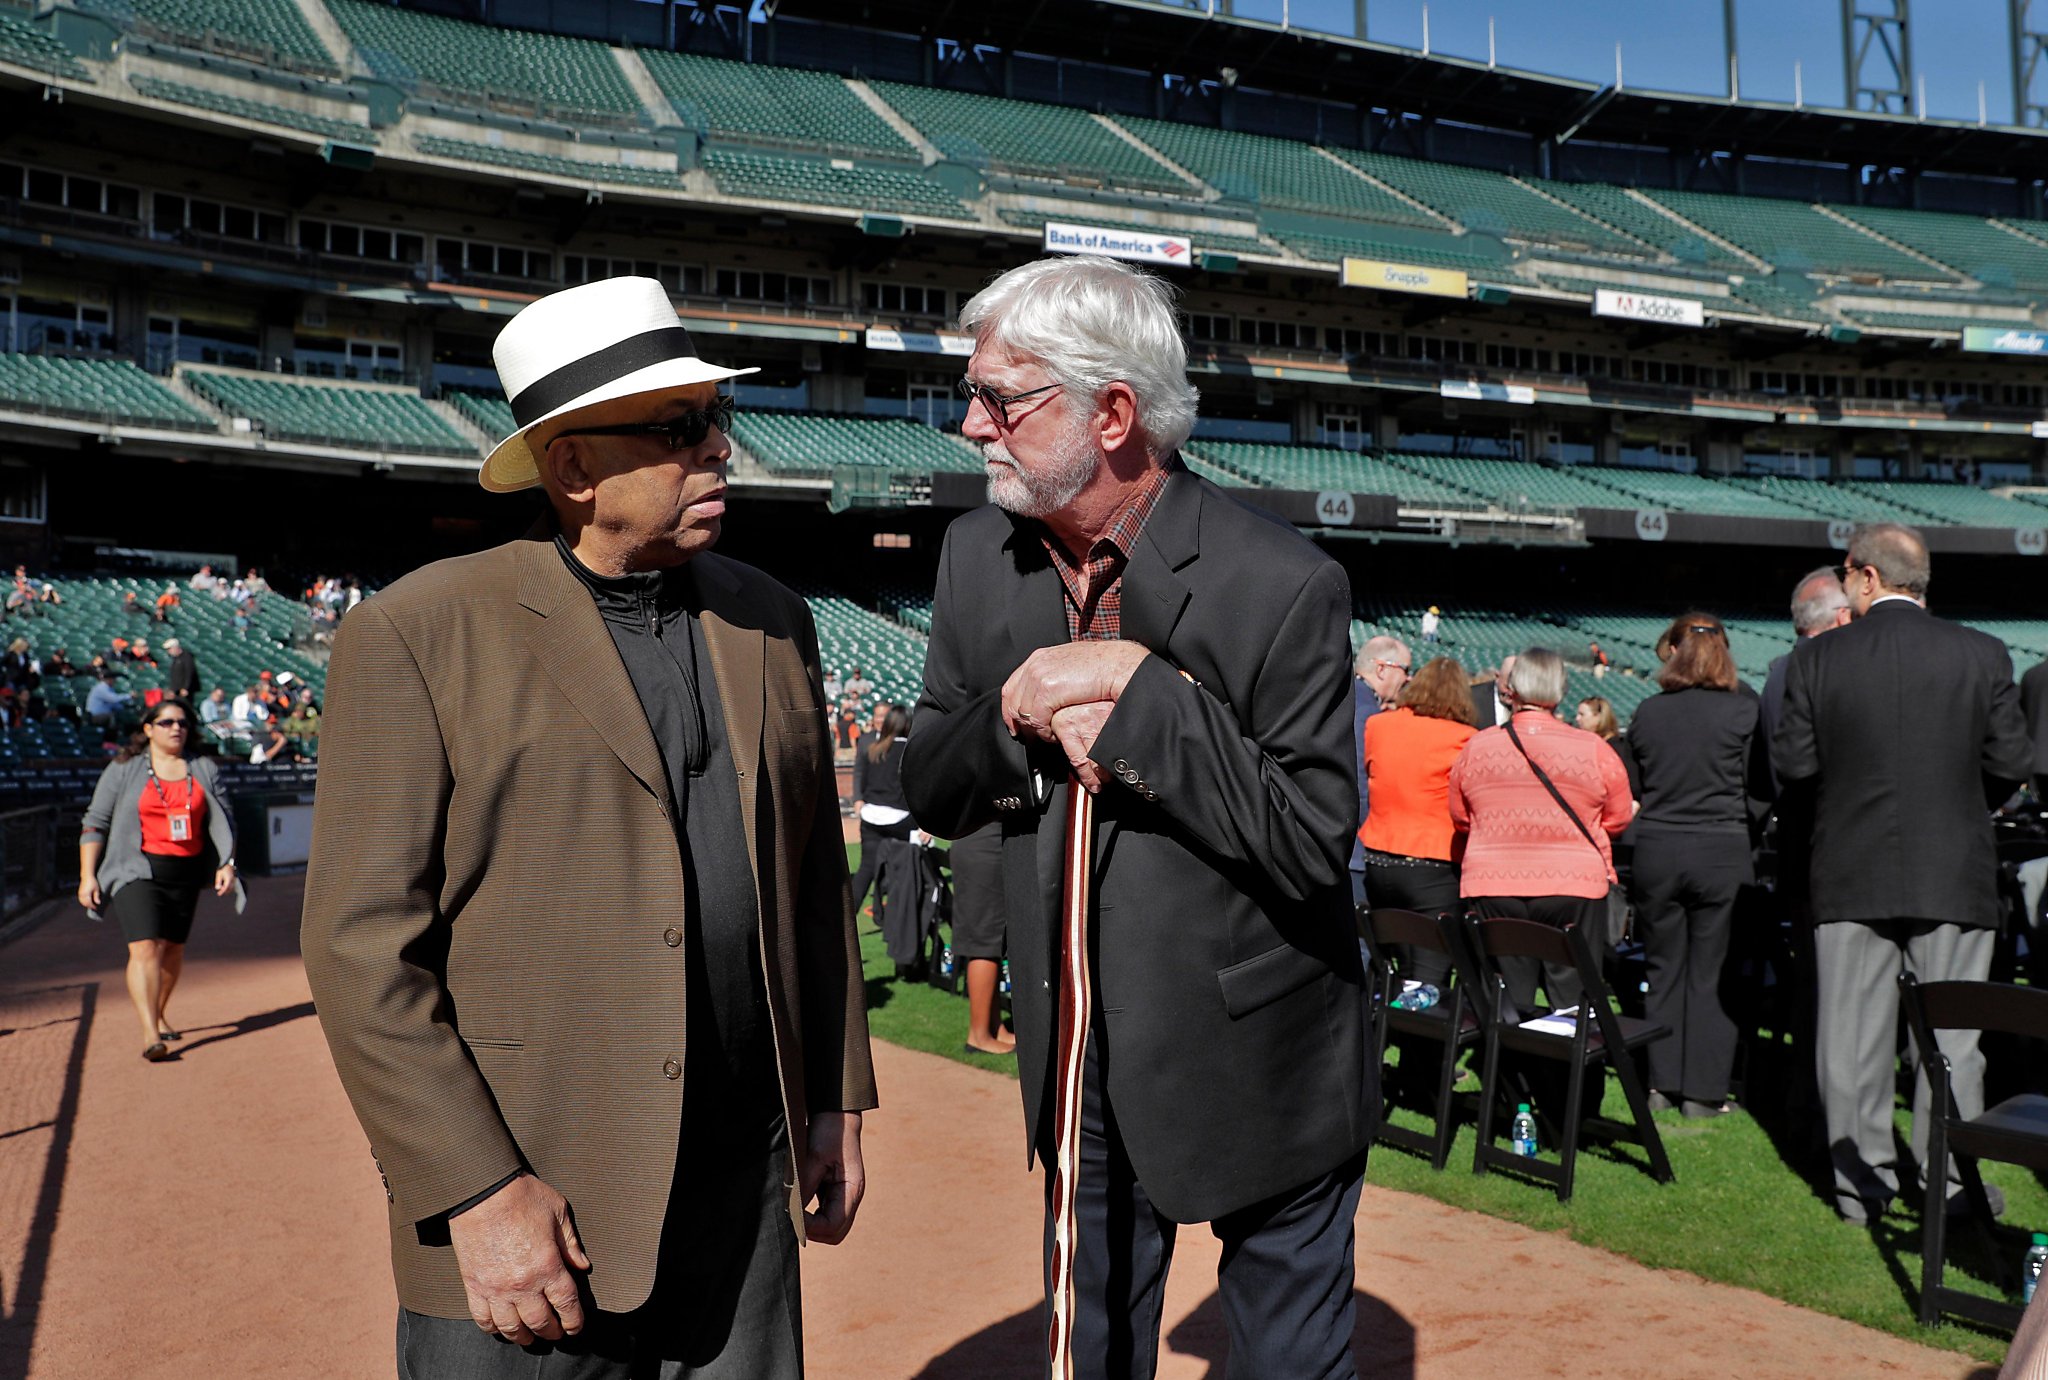 Giants great Orlando Cepeda in family legal fight over conservatorship,  money